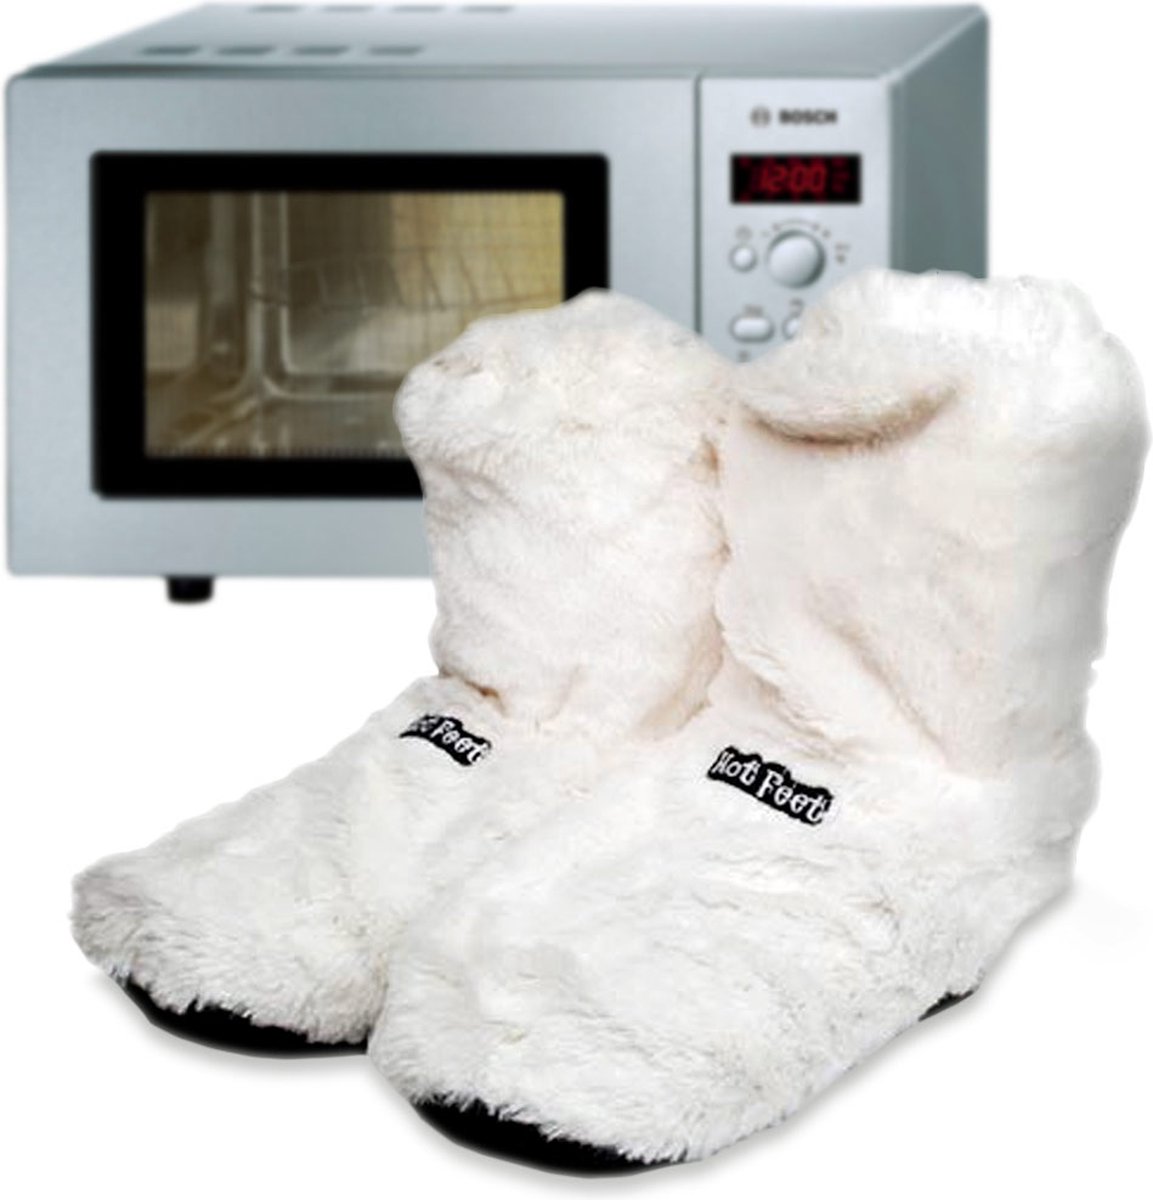 MikaMax - Hot Boots - Chaussons chauffant micro-ondes - Blanc